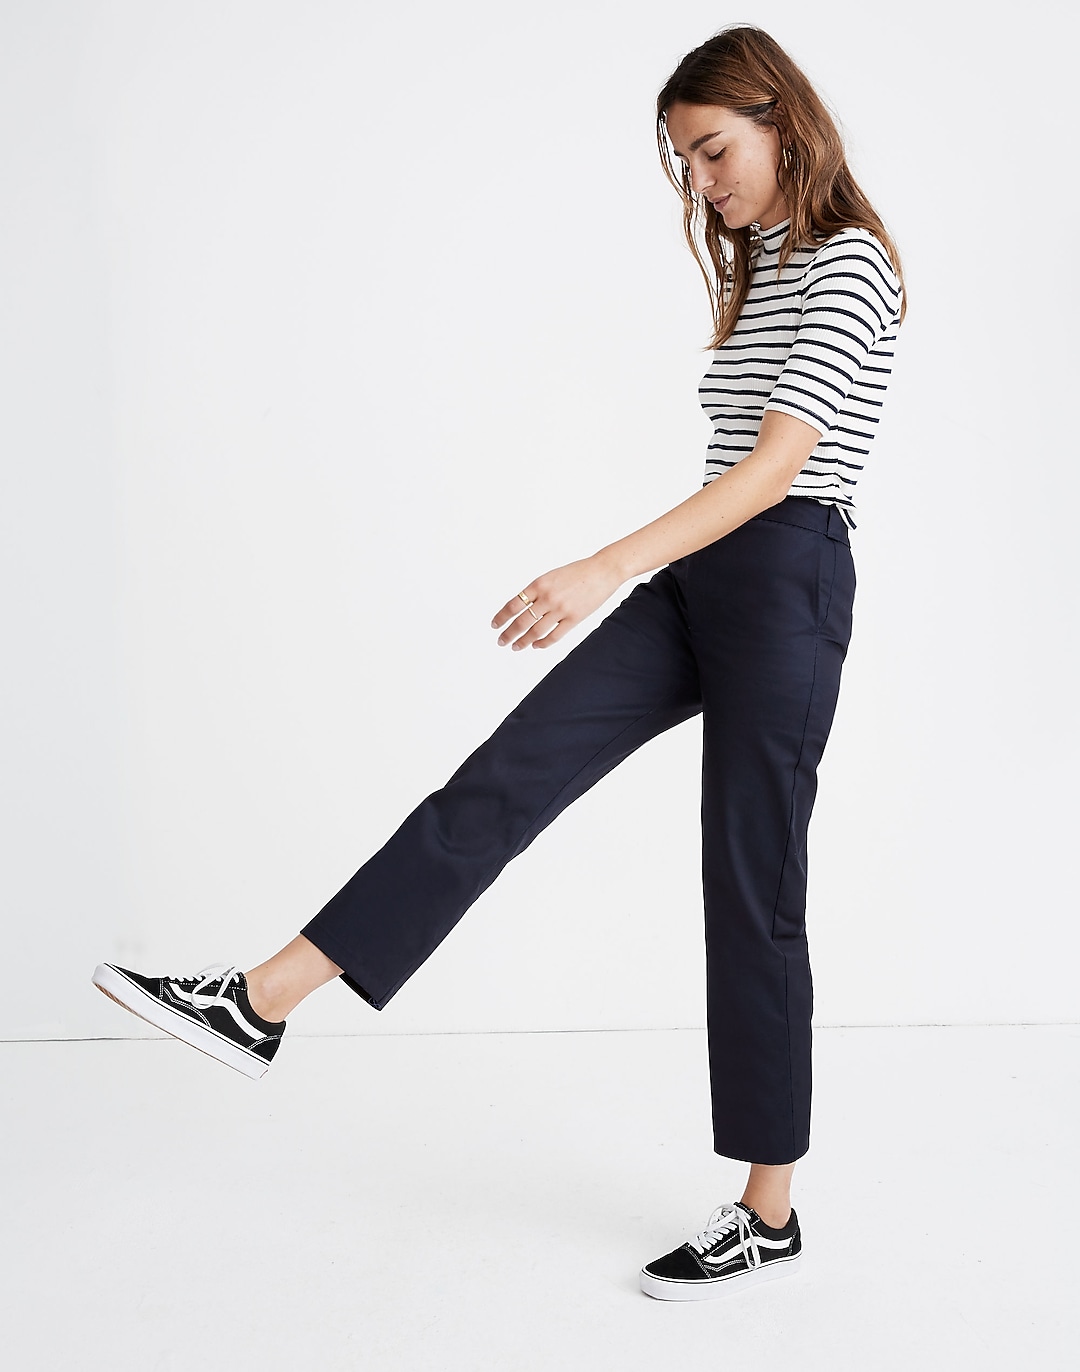 Vice genstand du er Madewell x Dickies® Twill Pants